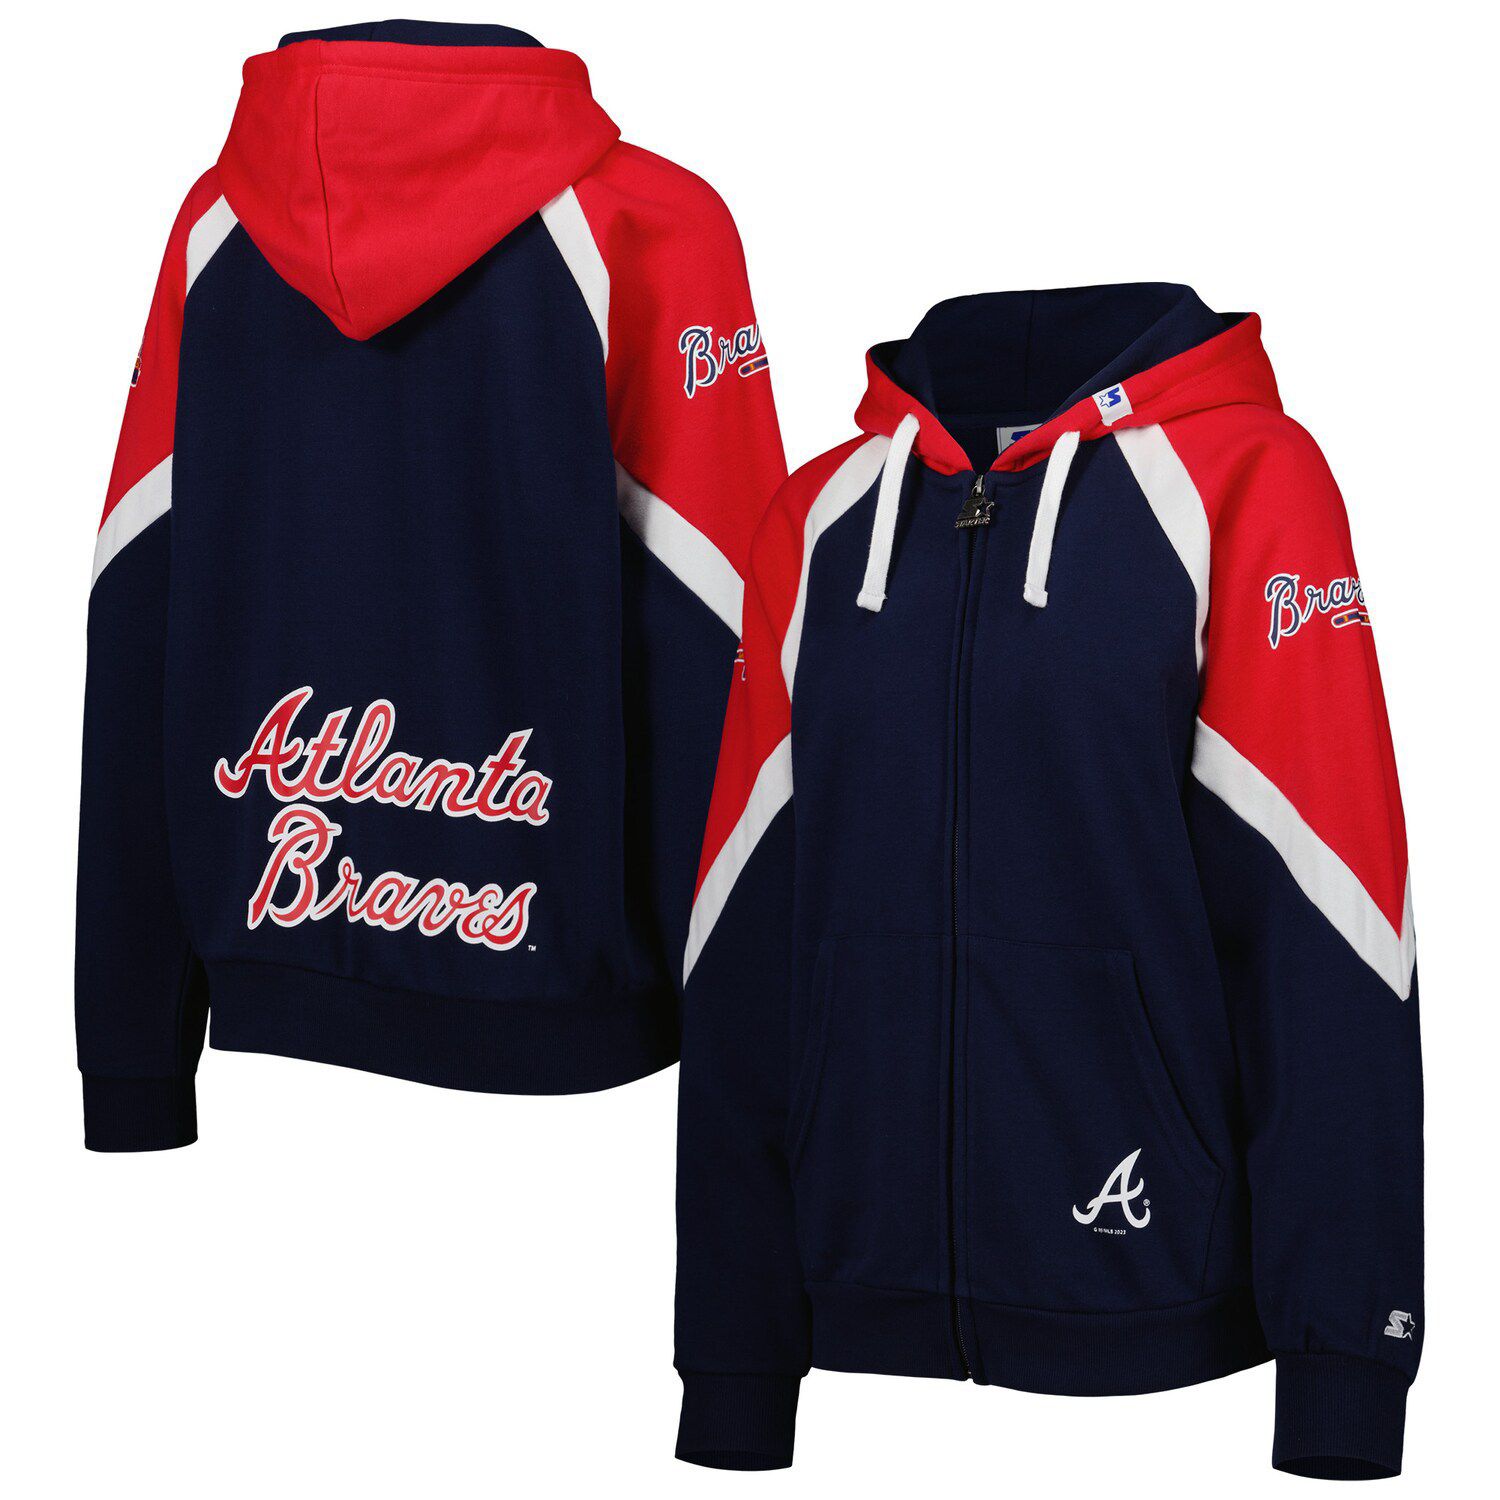 Official Atlanta Braves Columbia Jackets, Braves Pullovers, Track